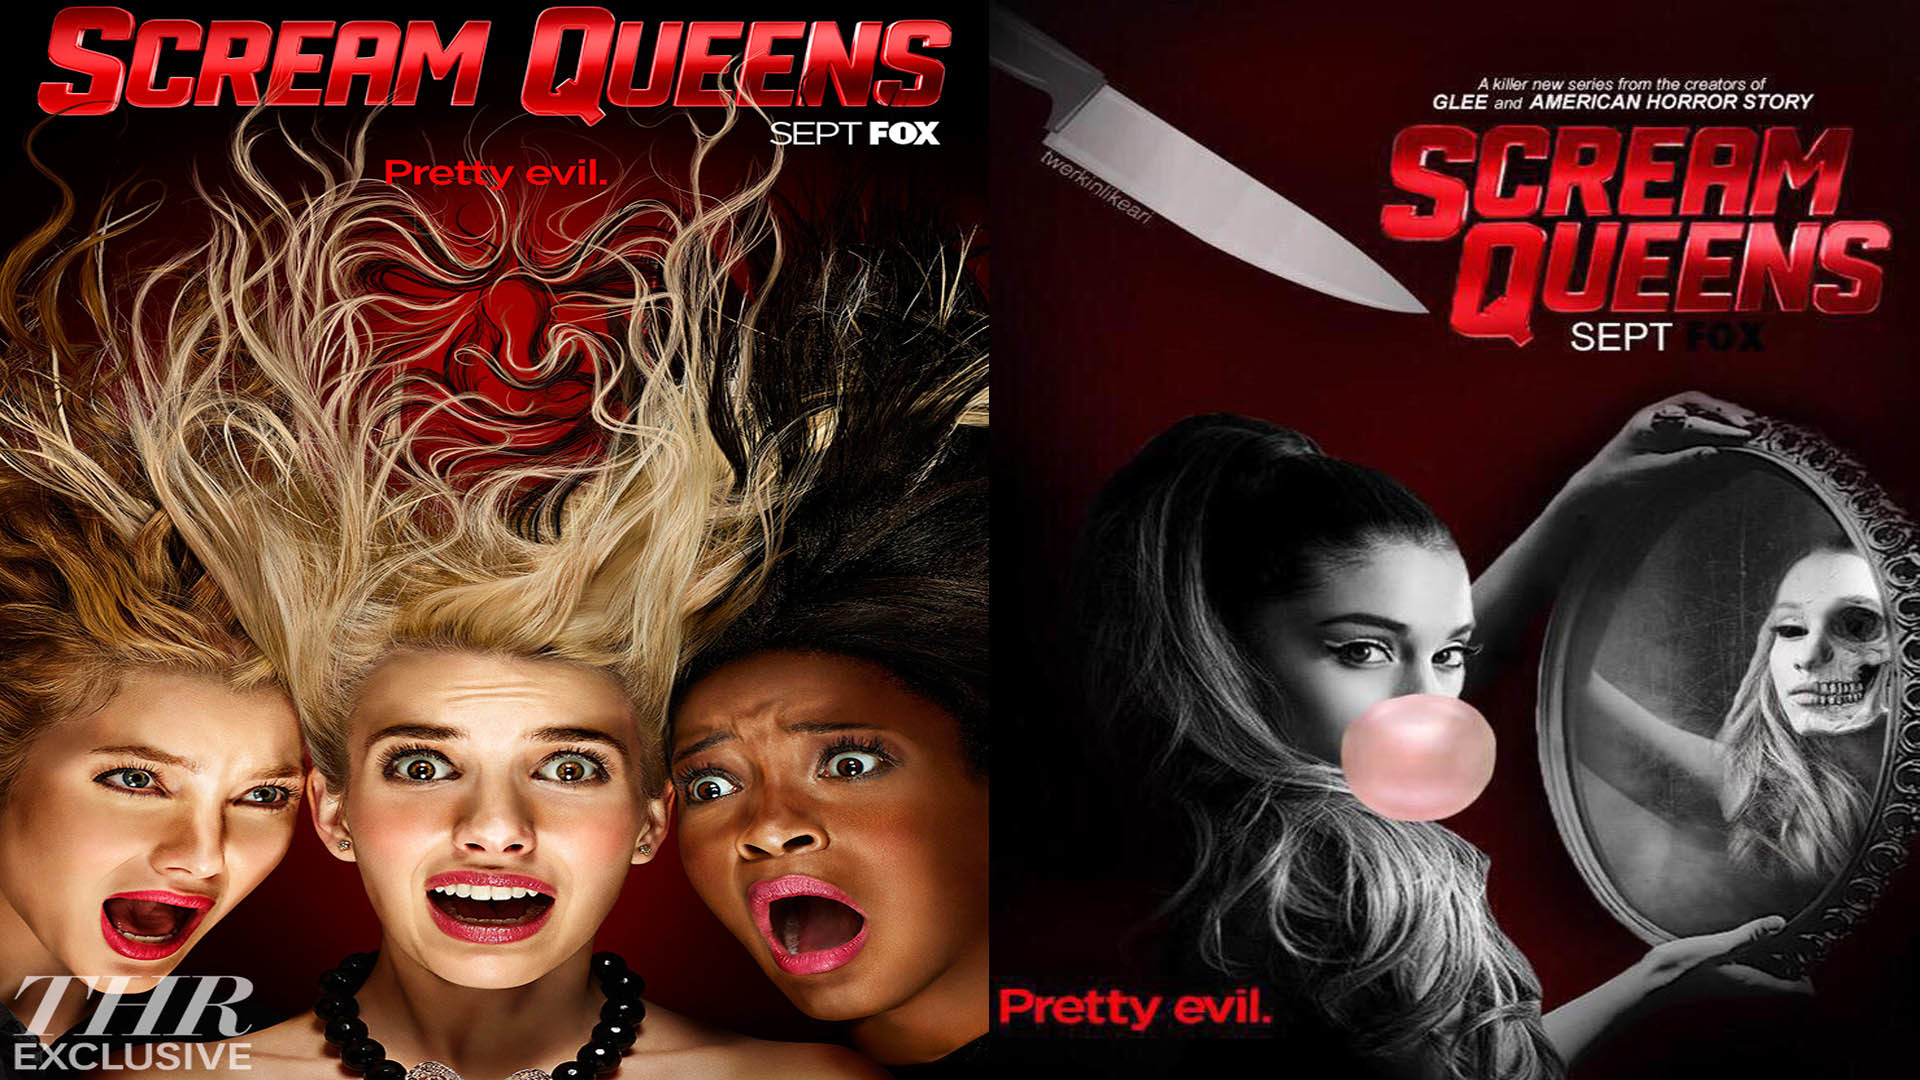 1920x1080 Scream Queens Pretty Evil Tv Series 2015 Posters Wallpaper by .